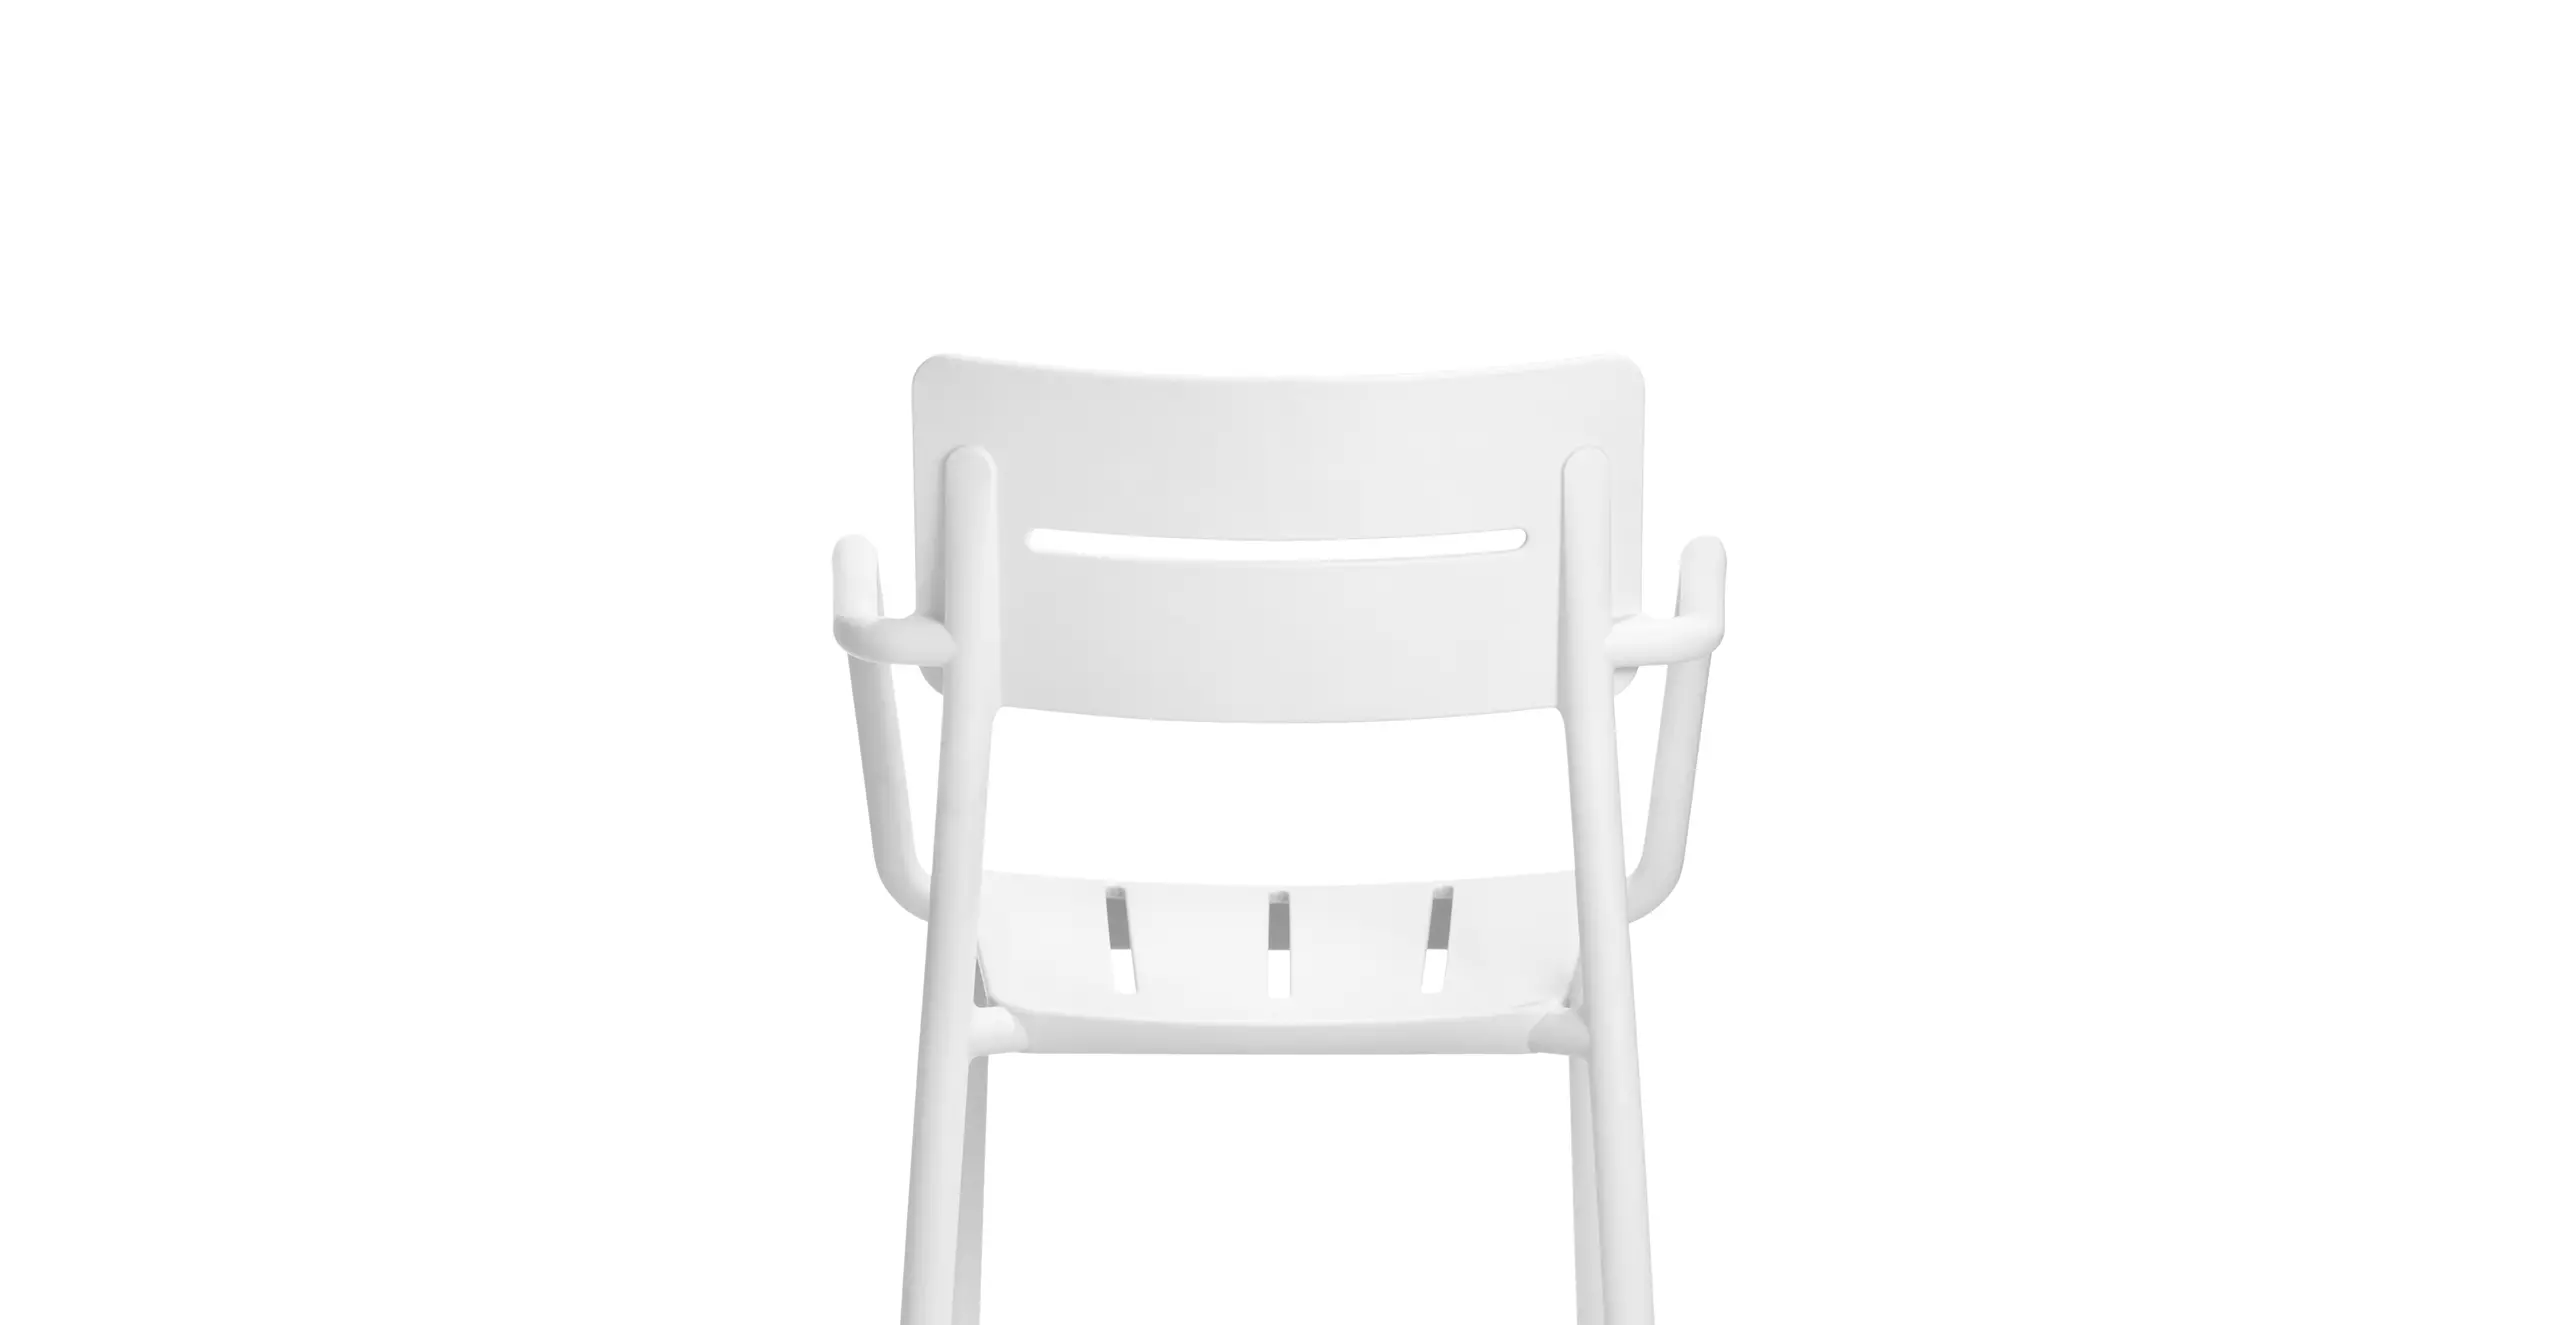 Outo Armchair by TOOU design